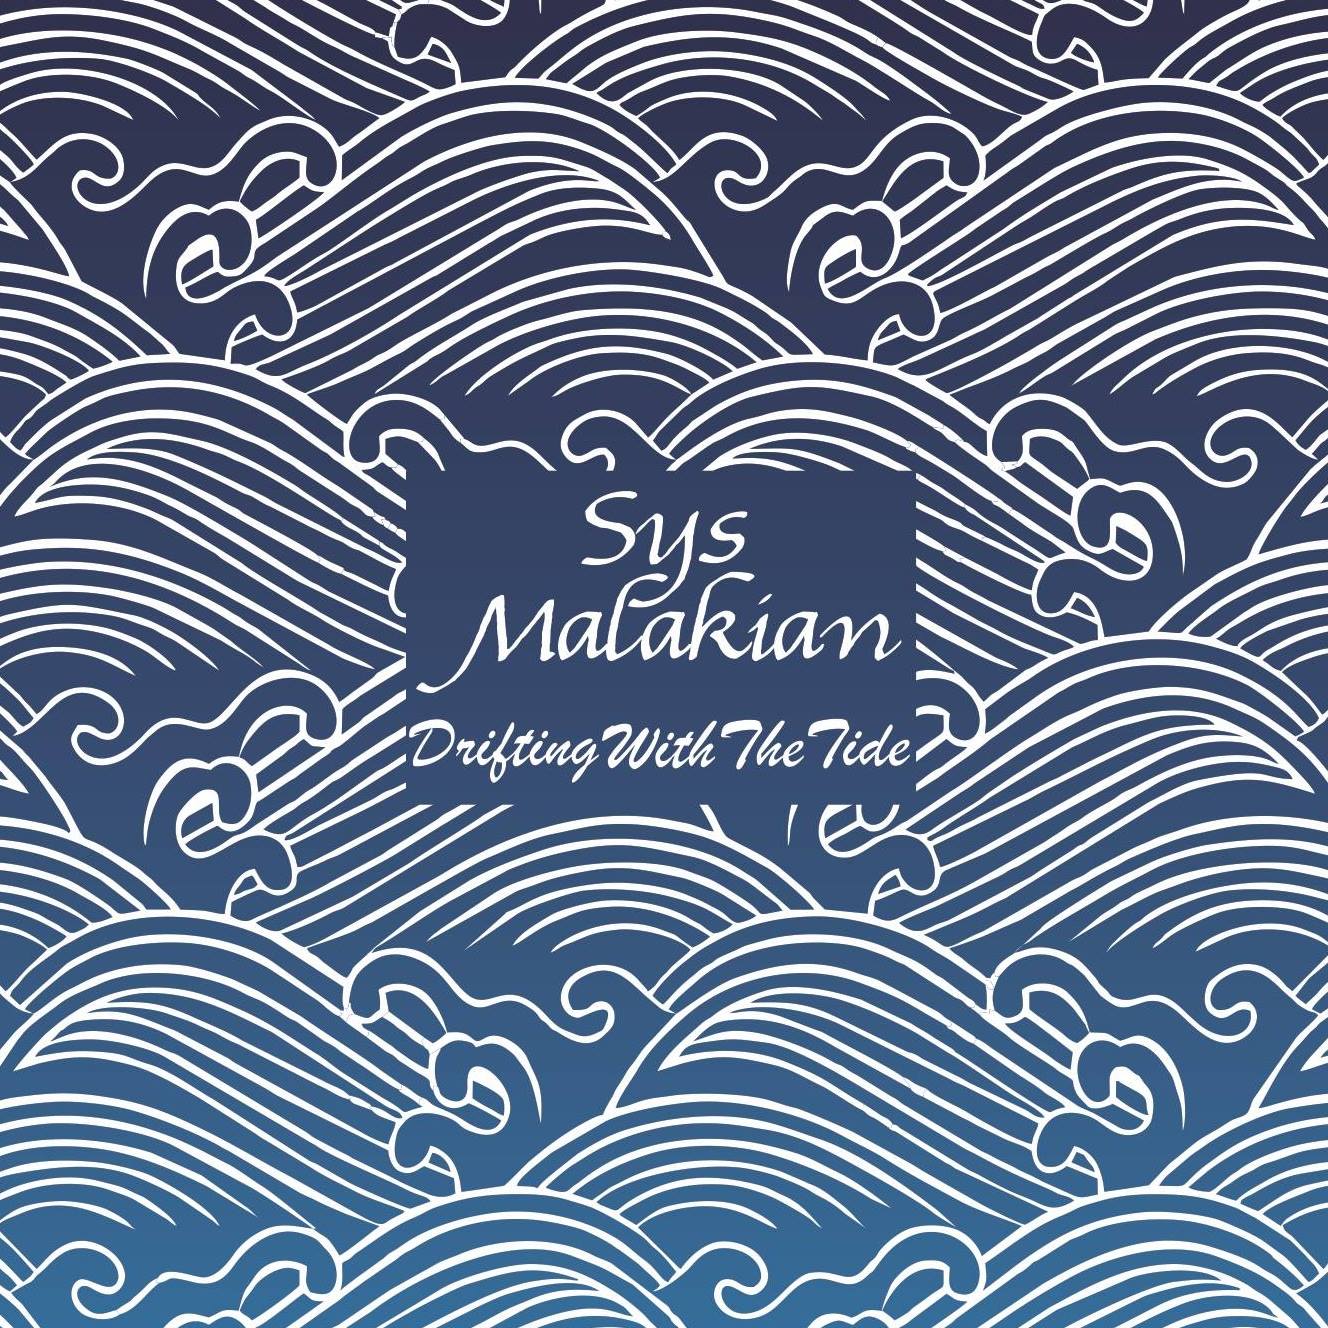 Sys Malakian - Drifting With The Tide